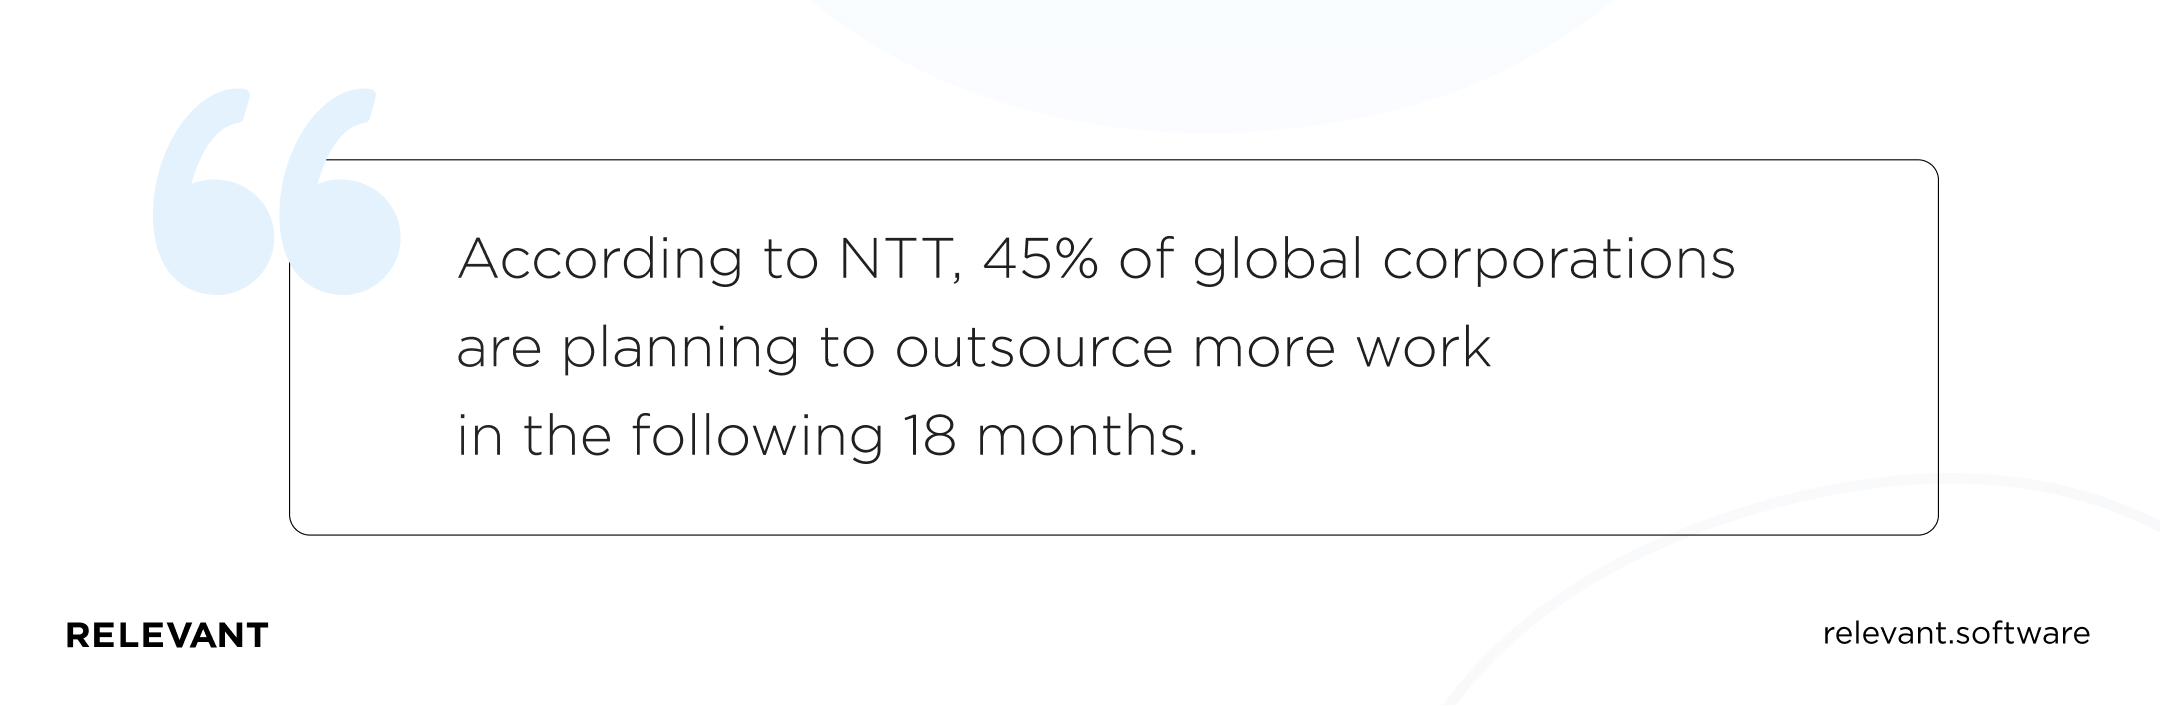 According to NTT, 45% of global corporations are planning to outsource more work in the following 18 months.